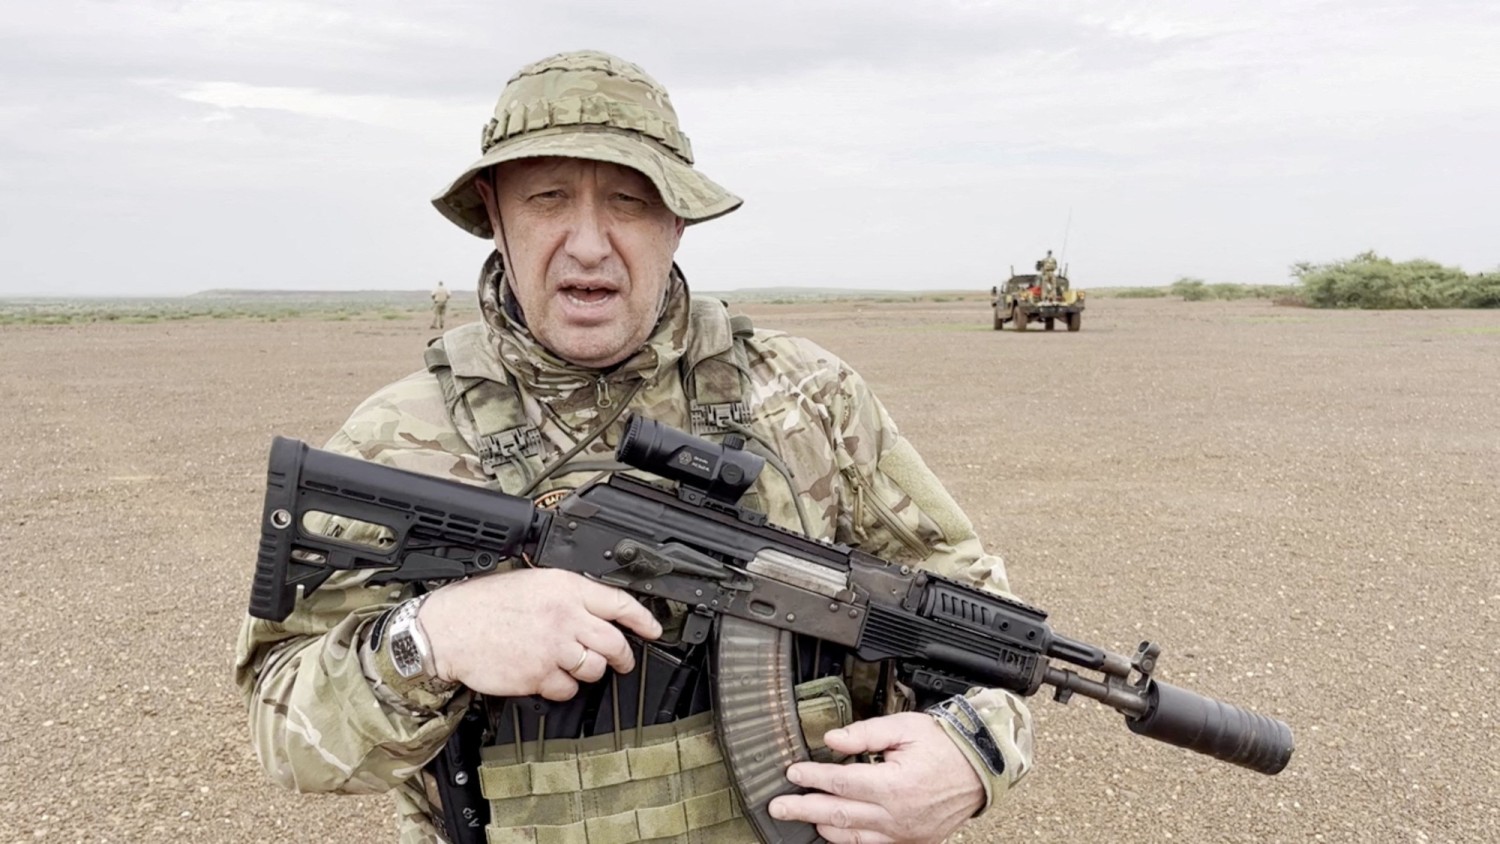 Yevgeny Prigozhin, chief of Russian private mercenary group Wagner, gives an address at an unknown location, in this still image taken from video possibly shot in Africa, on Monday. PMC Wagner/Reuters